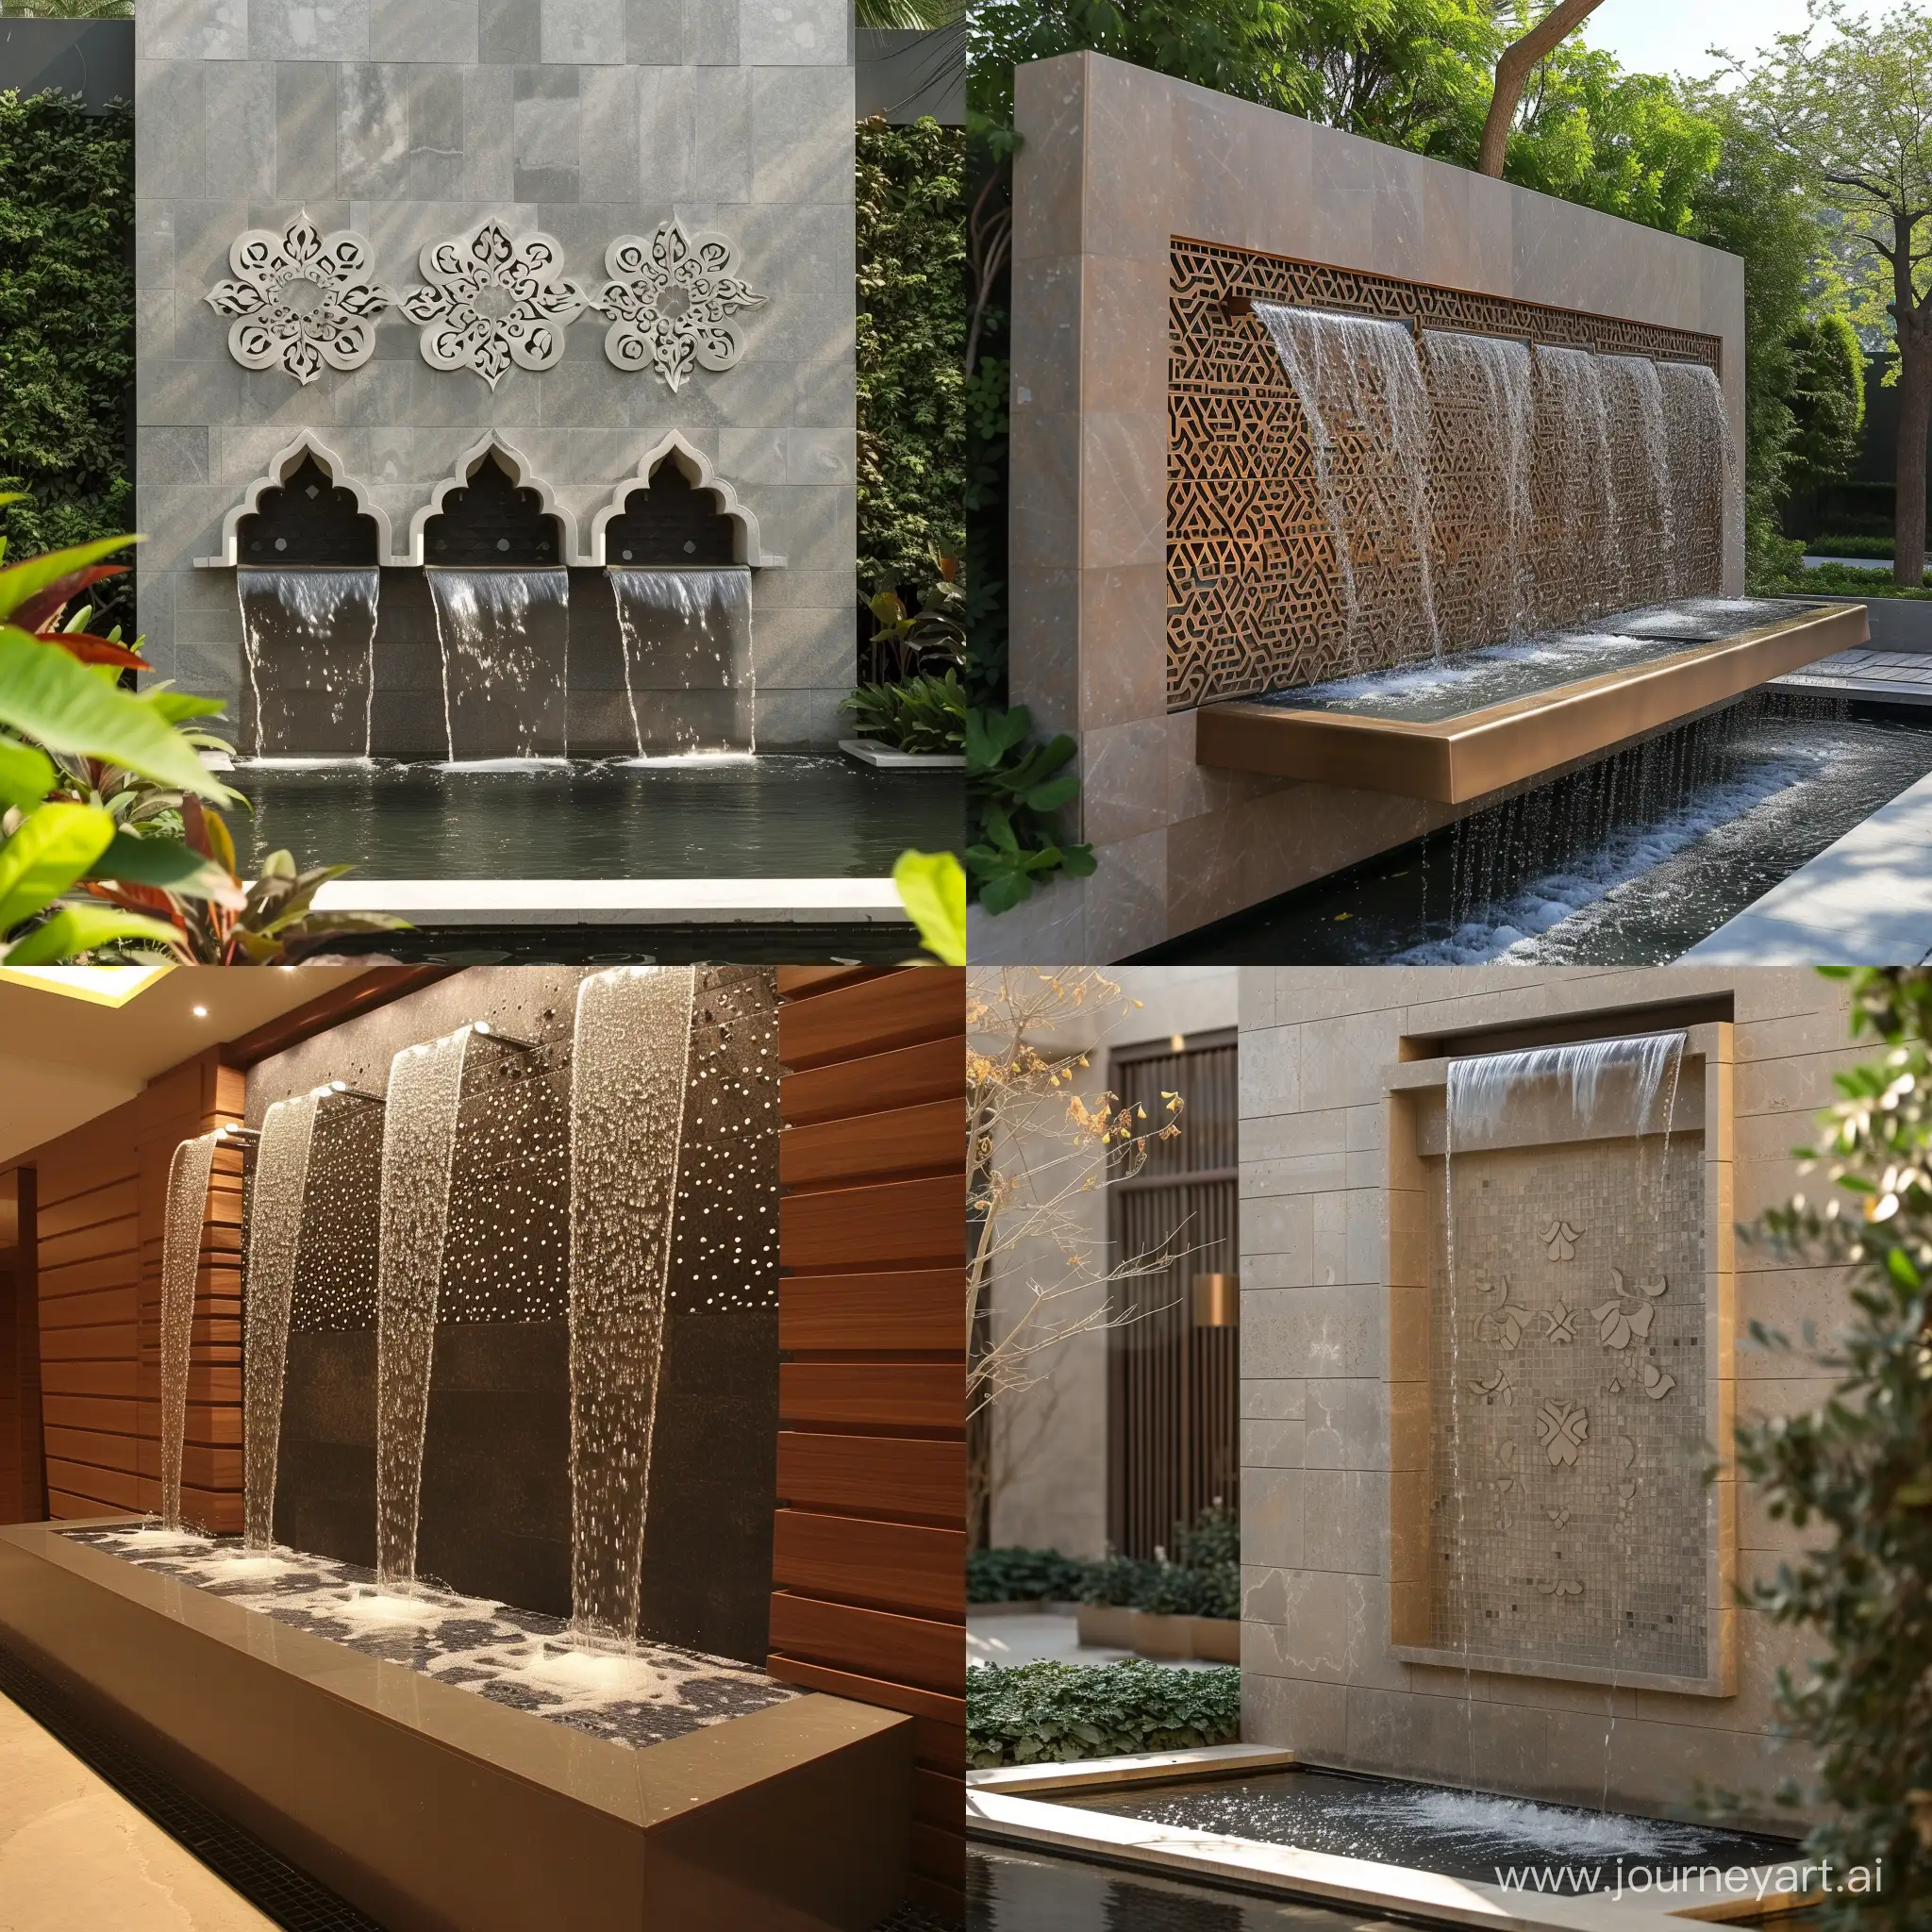 Mimar-Sinans-Exquisite-Wall-Fountain-Design-Architectural-Elegance-in-a-11-Aspect-Ratio